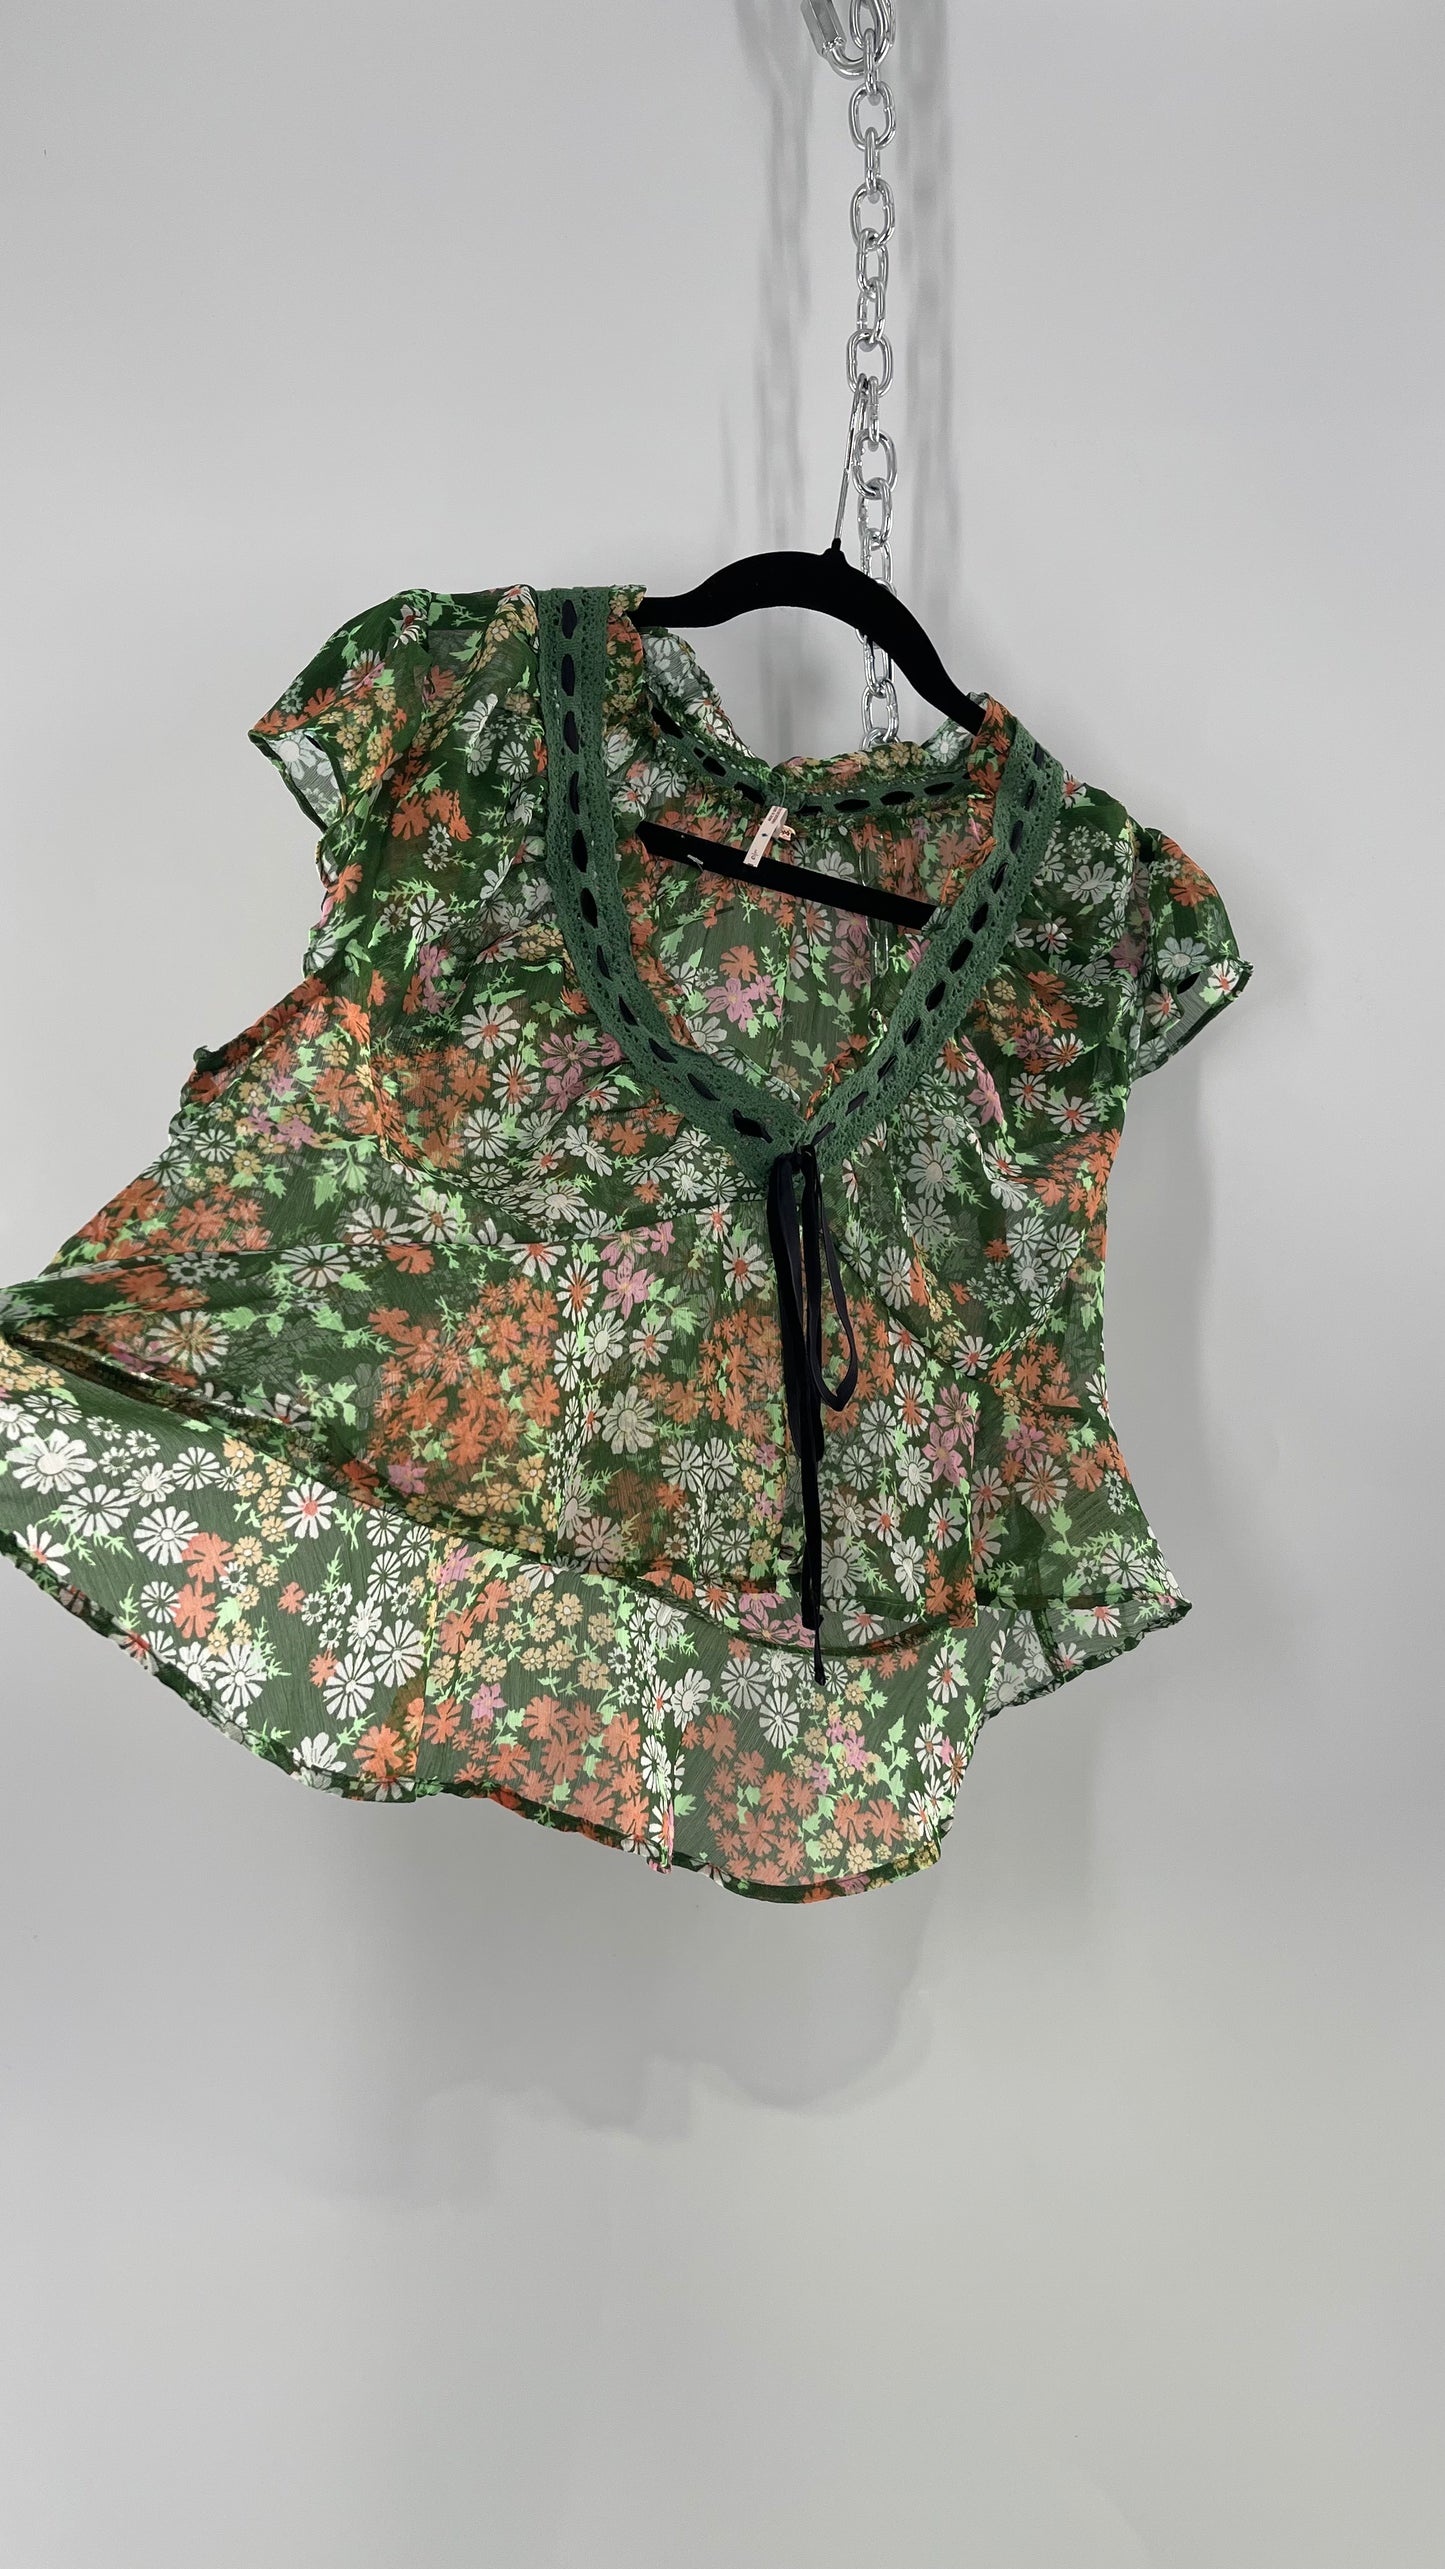 Free People Green Floral Blouse with Green Lace Neckline and Black Velvet Ribbon (Large)